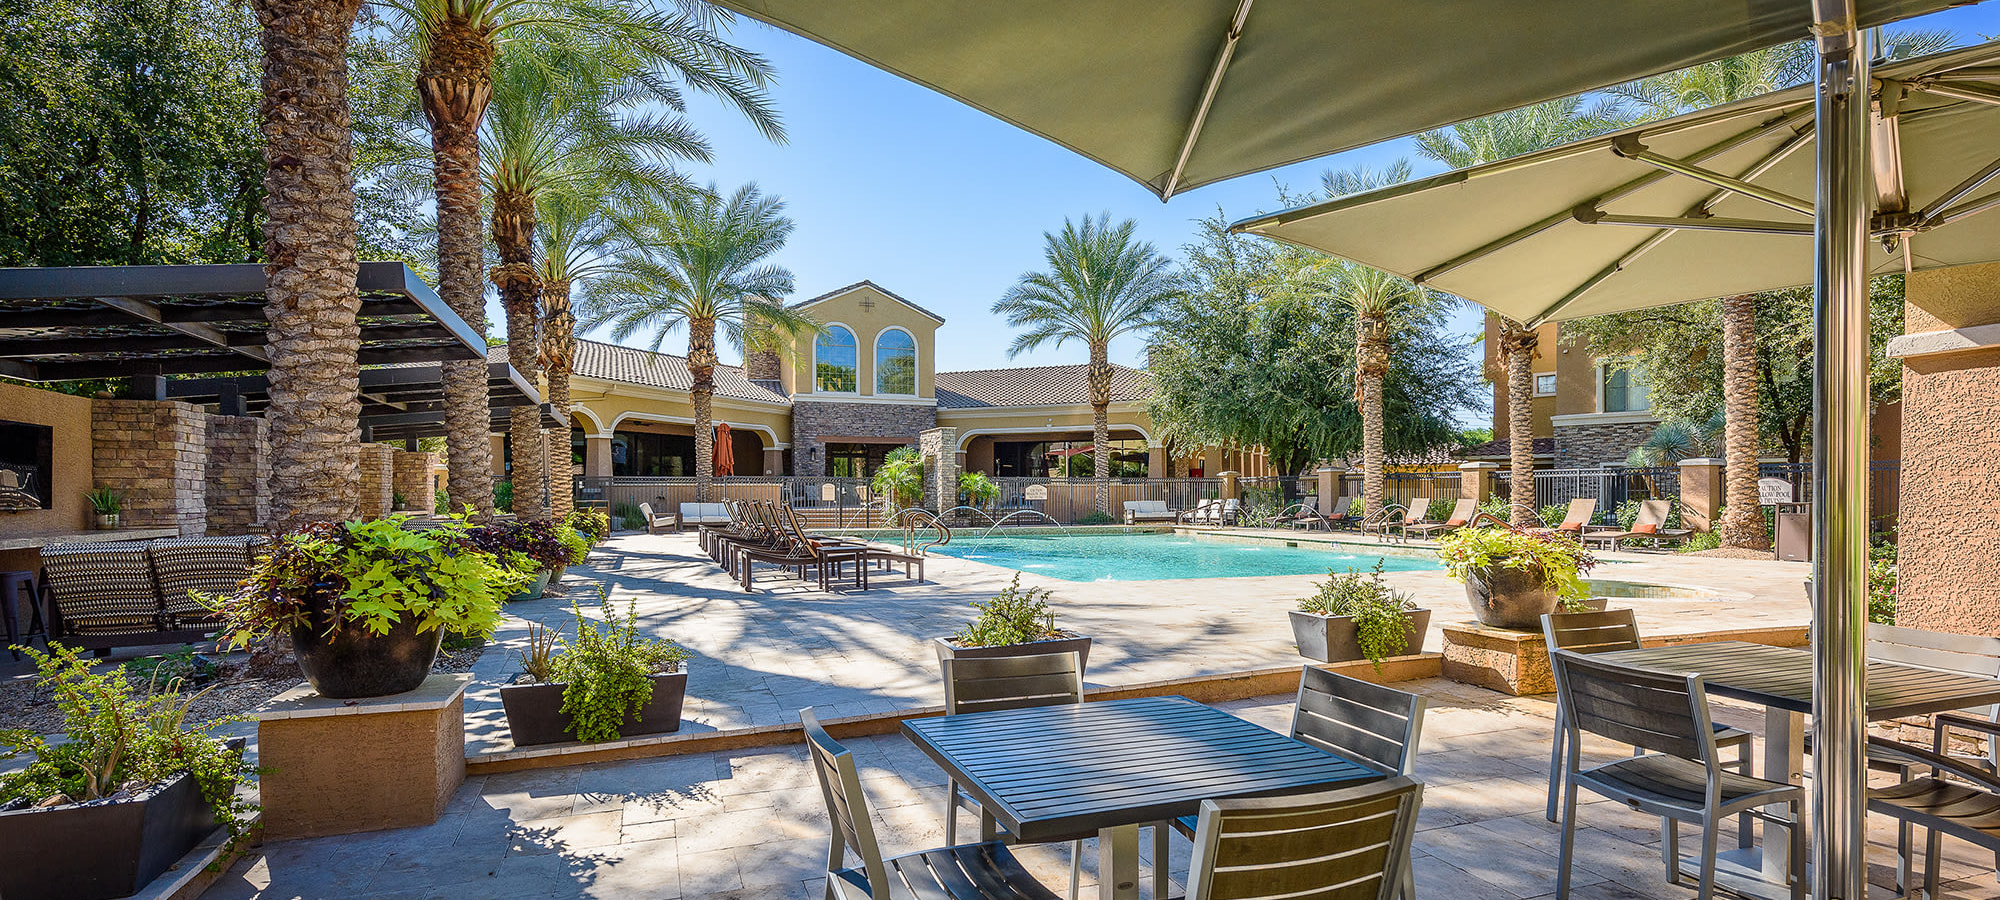 Outdoor lounge at Stone Oaks in Chandler, Arizona